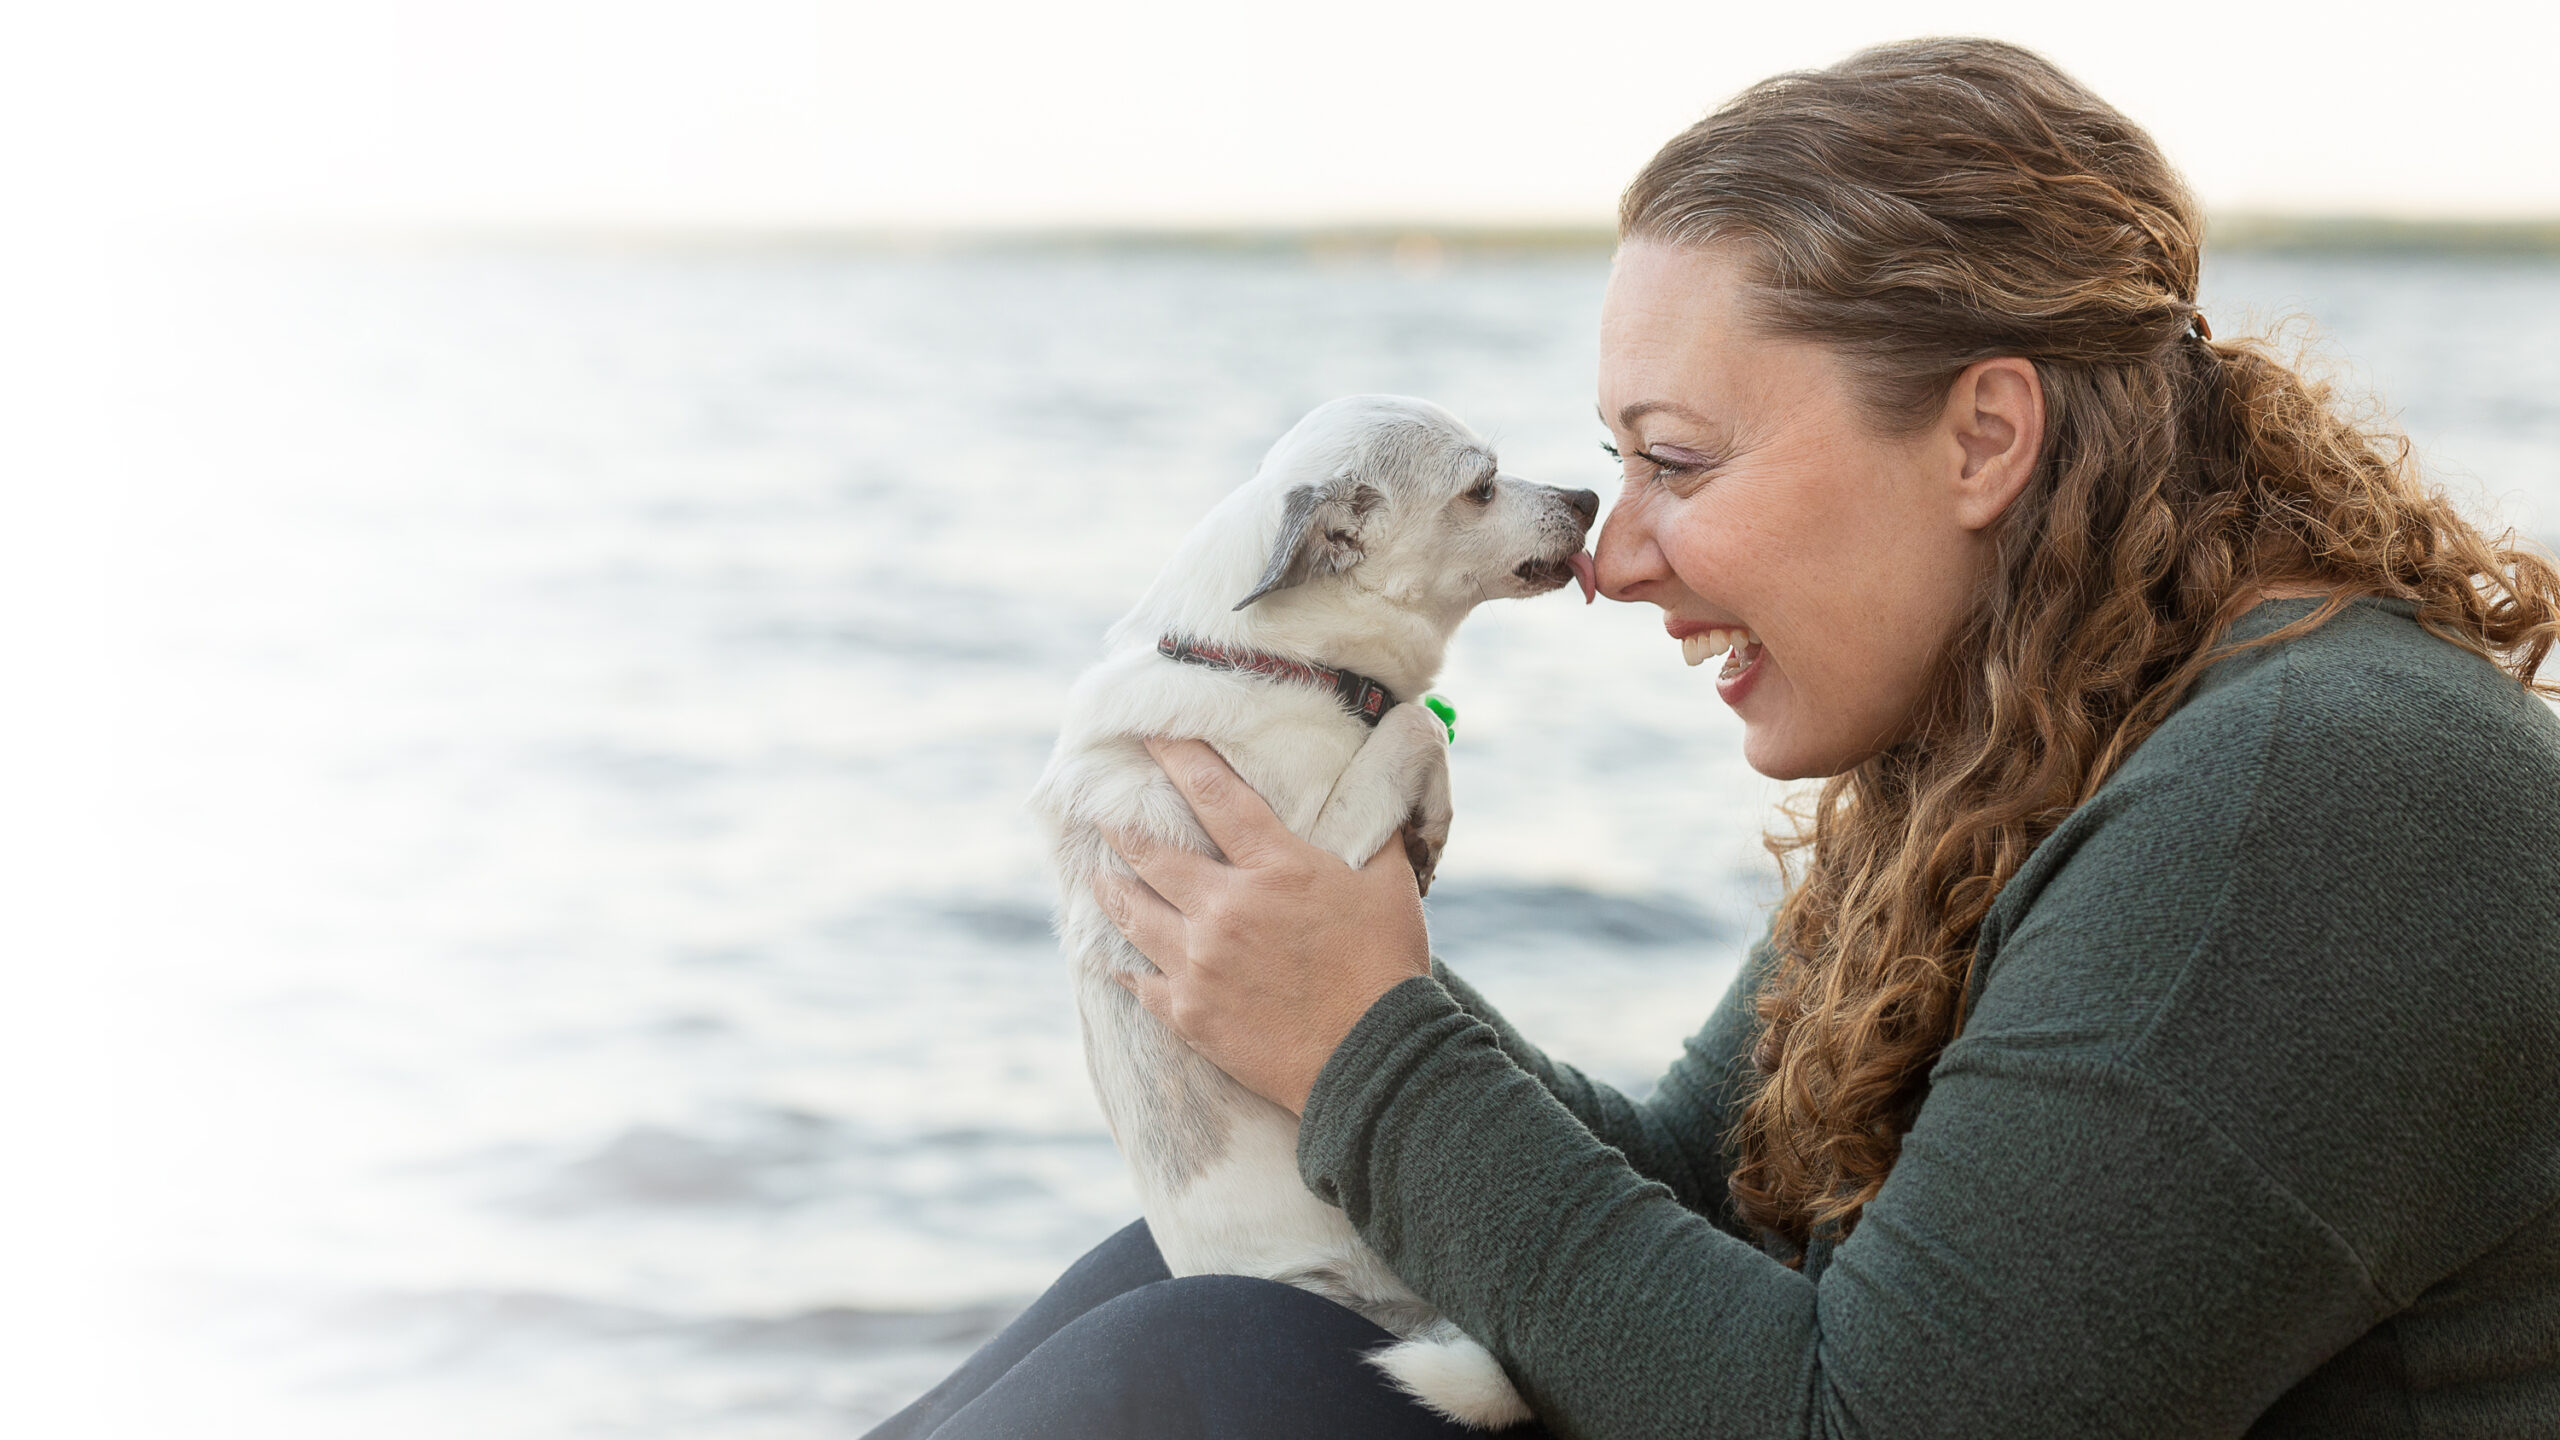 Stephanie Gibeault at a lake with a dog